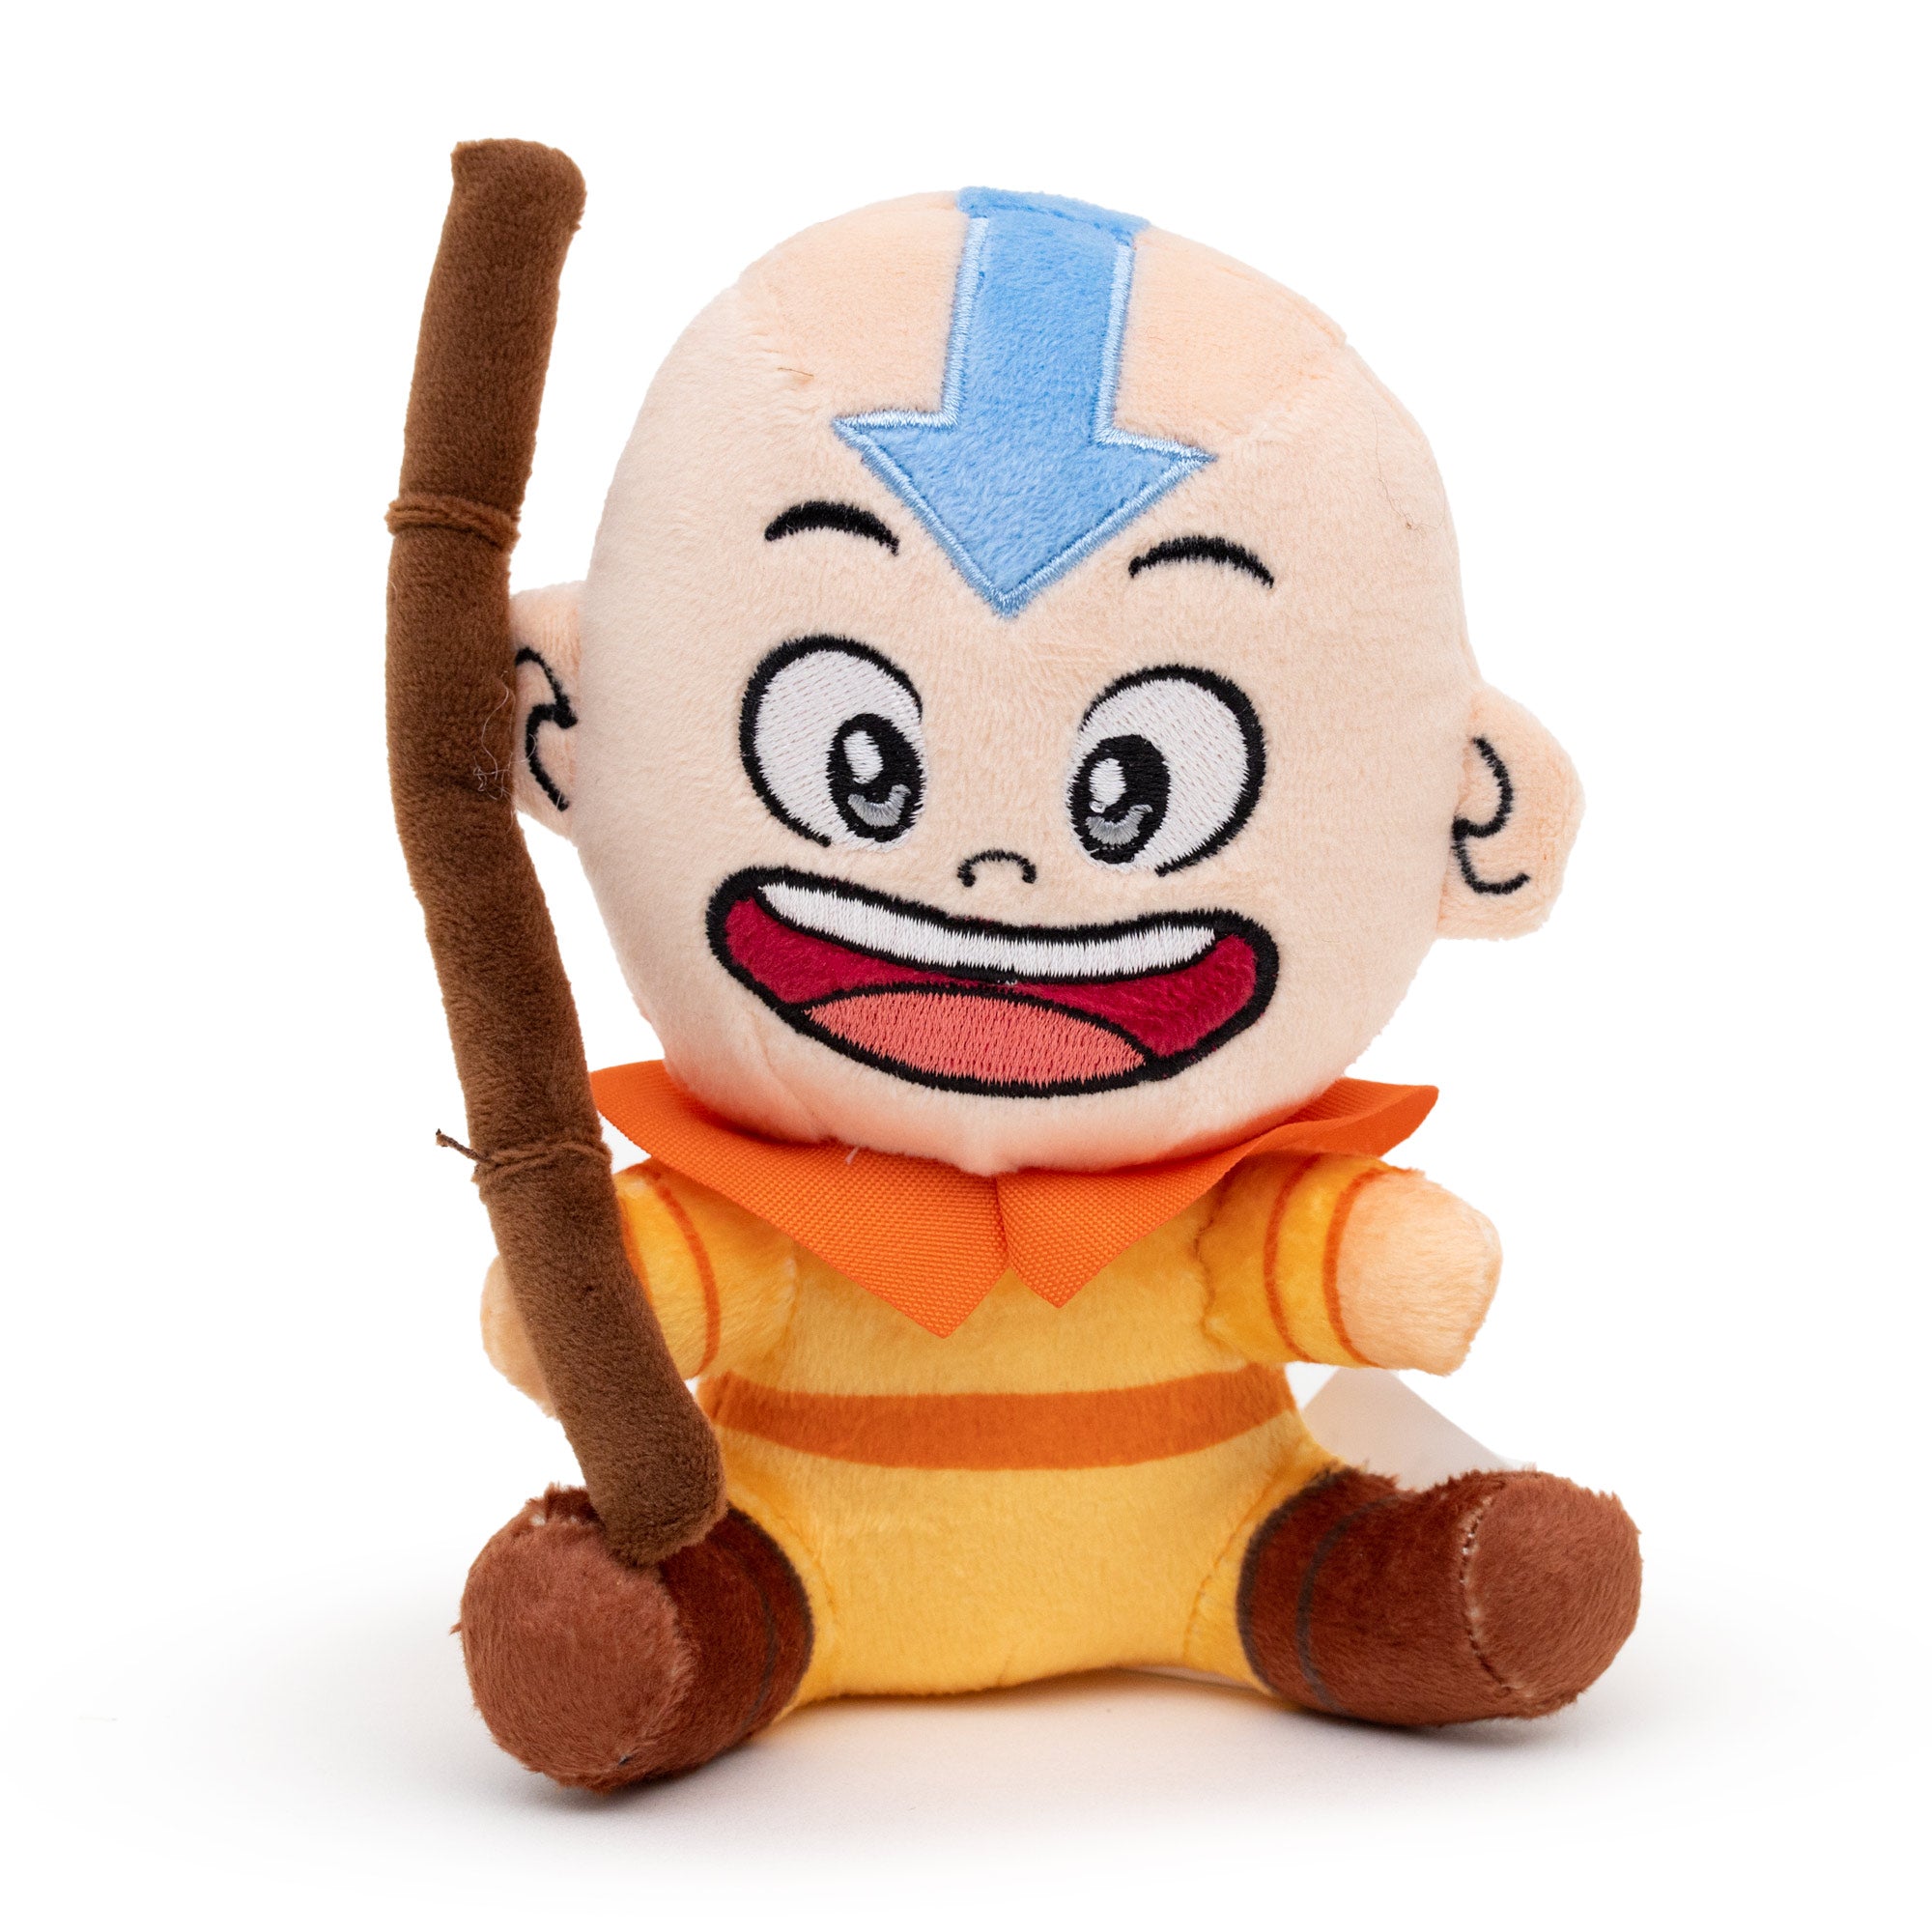 Avatar the Last Airbender Avatar Aang Sitting Squeaker Dog Toy